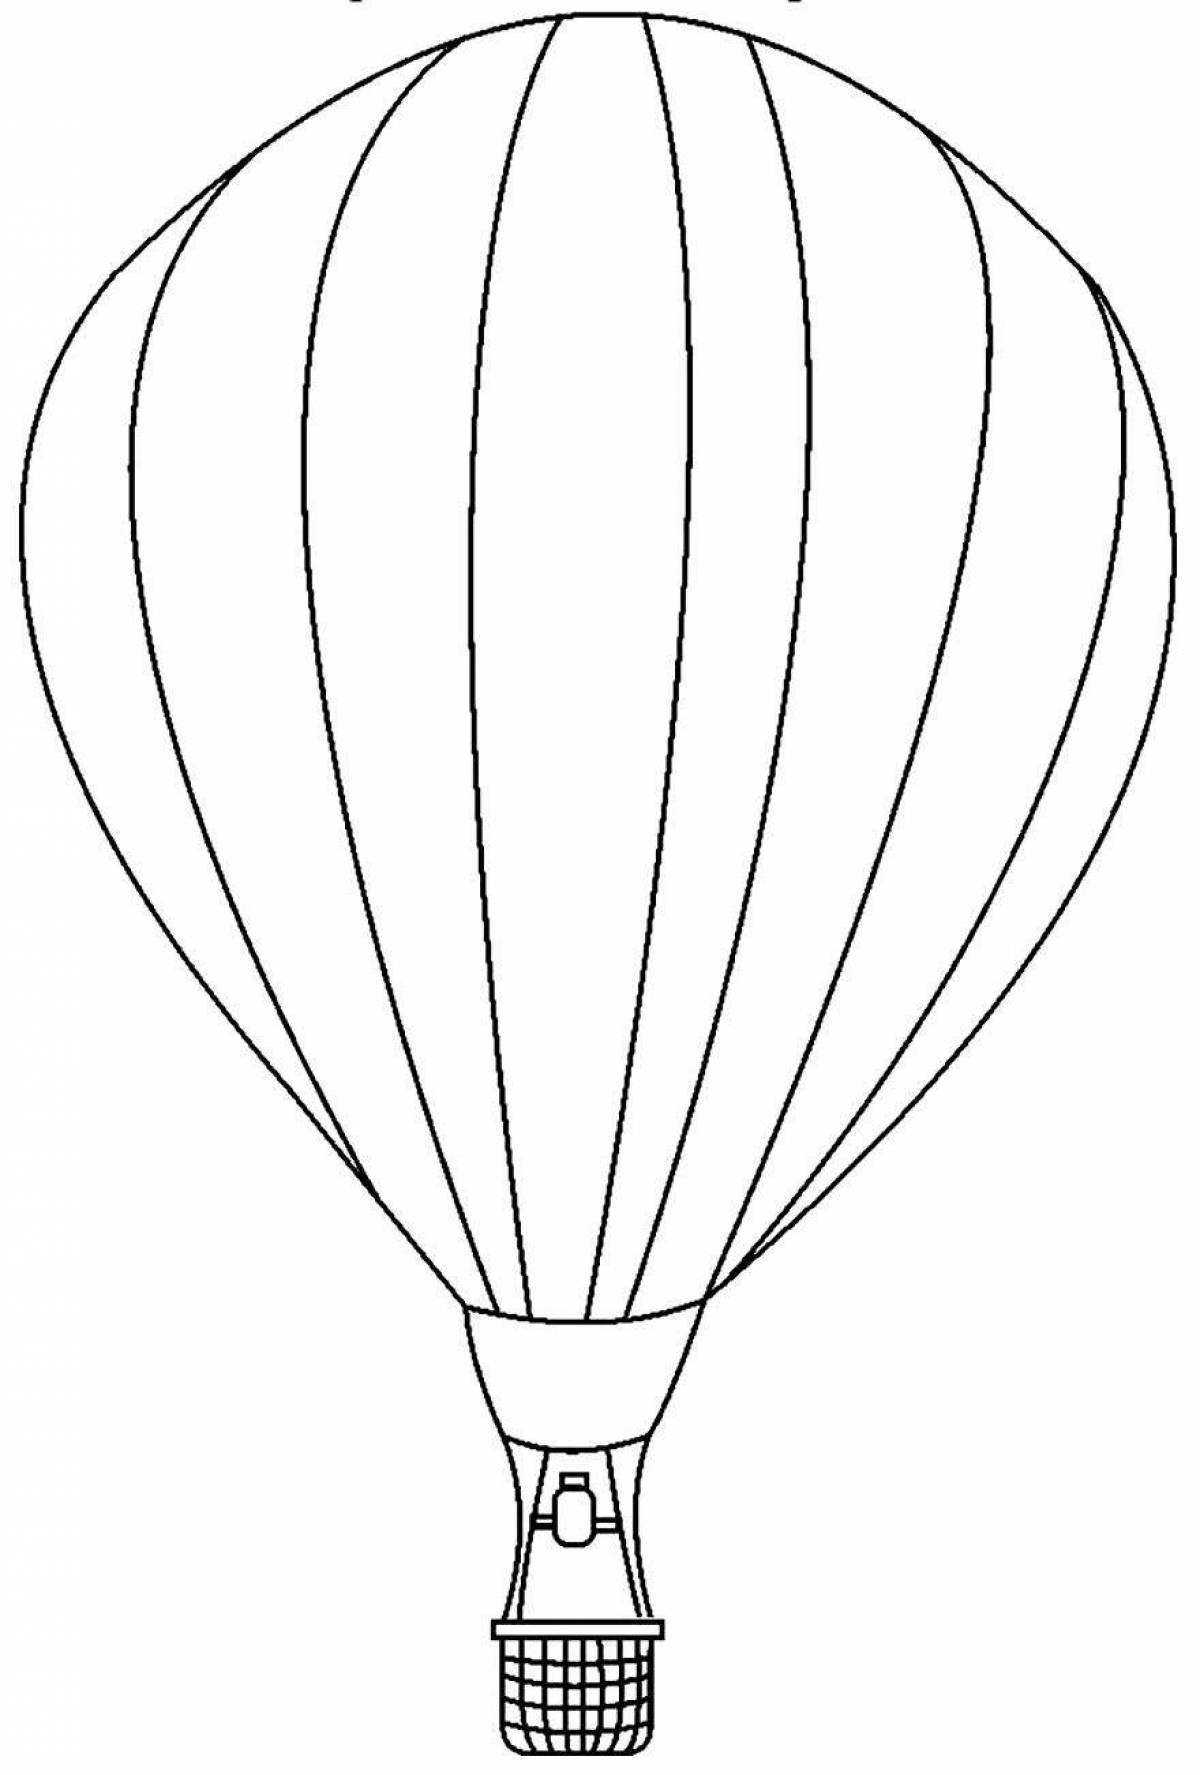 Coloring book shining balloon with a basket